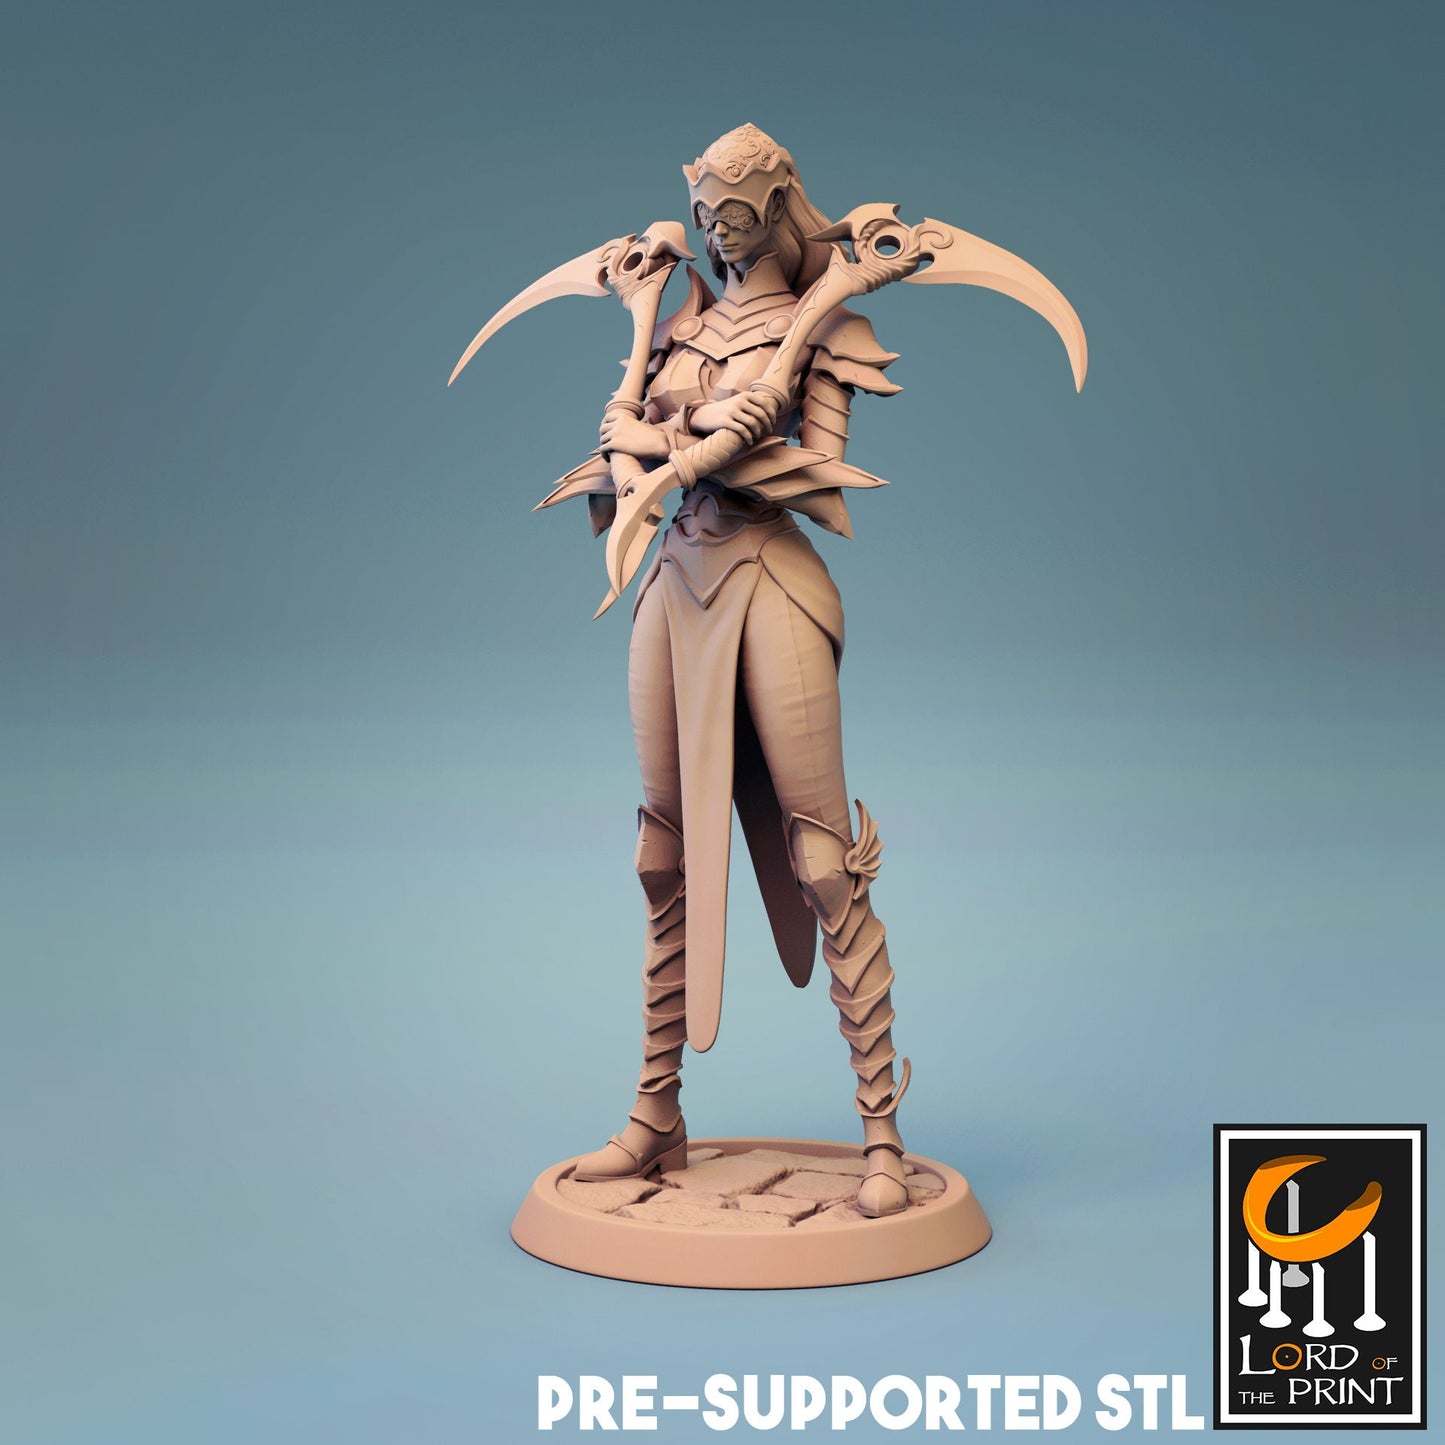 Female Human Fighter with dual Sickles D&D miniature, by Lord of the Print // 3D Print on Demand / DnD / Pathfinder / RPG